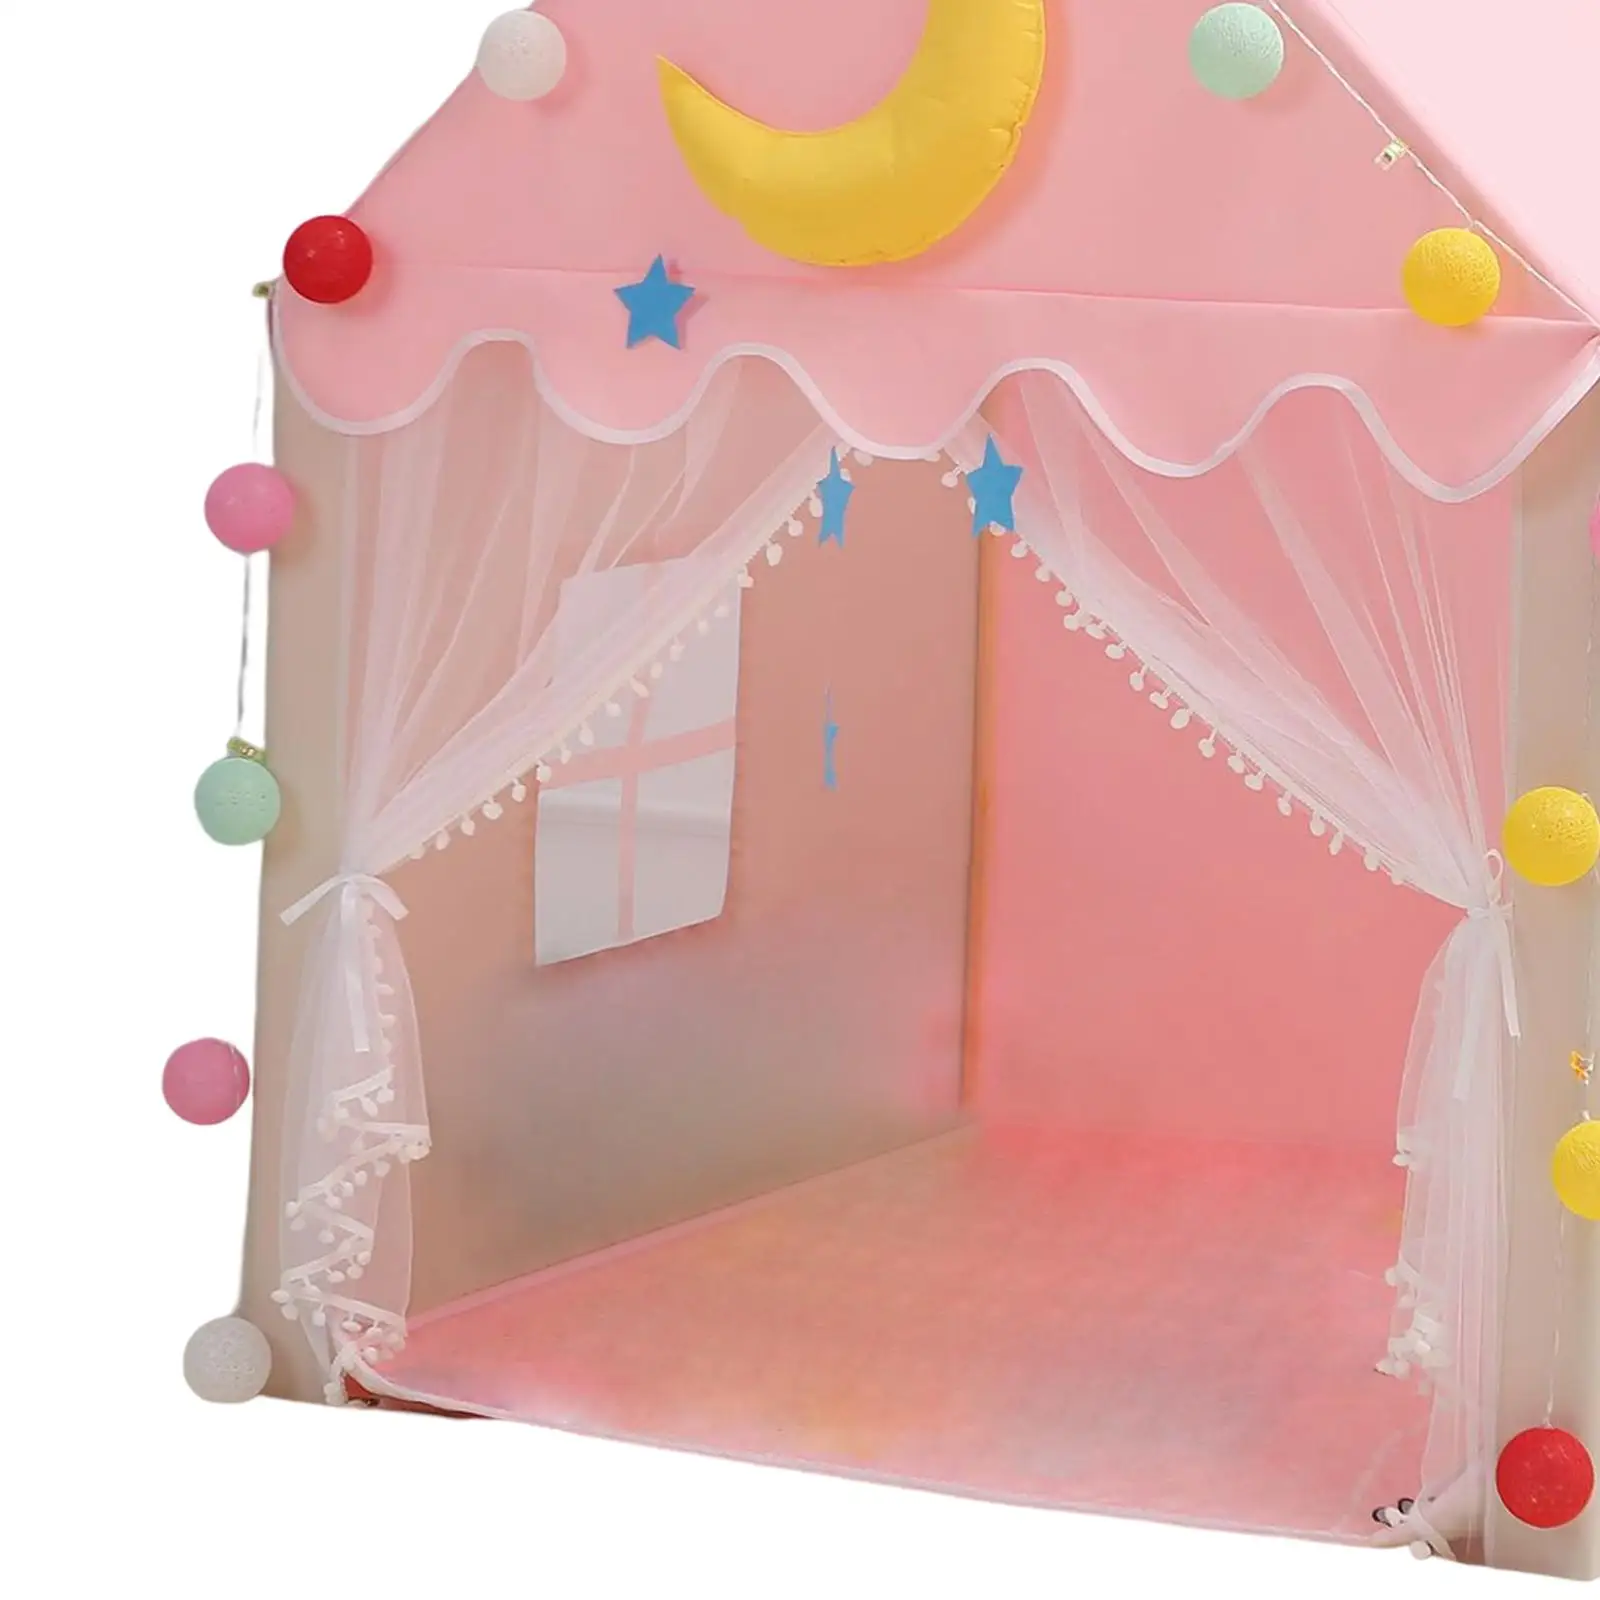 Indoor Outdoor Playhouse Child Room Decor Camping Playground Foldable Play House for Children Girls Boys Kids Birhtday Gift